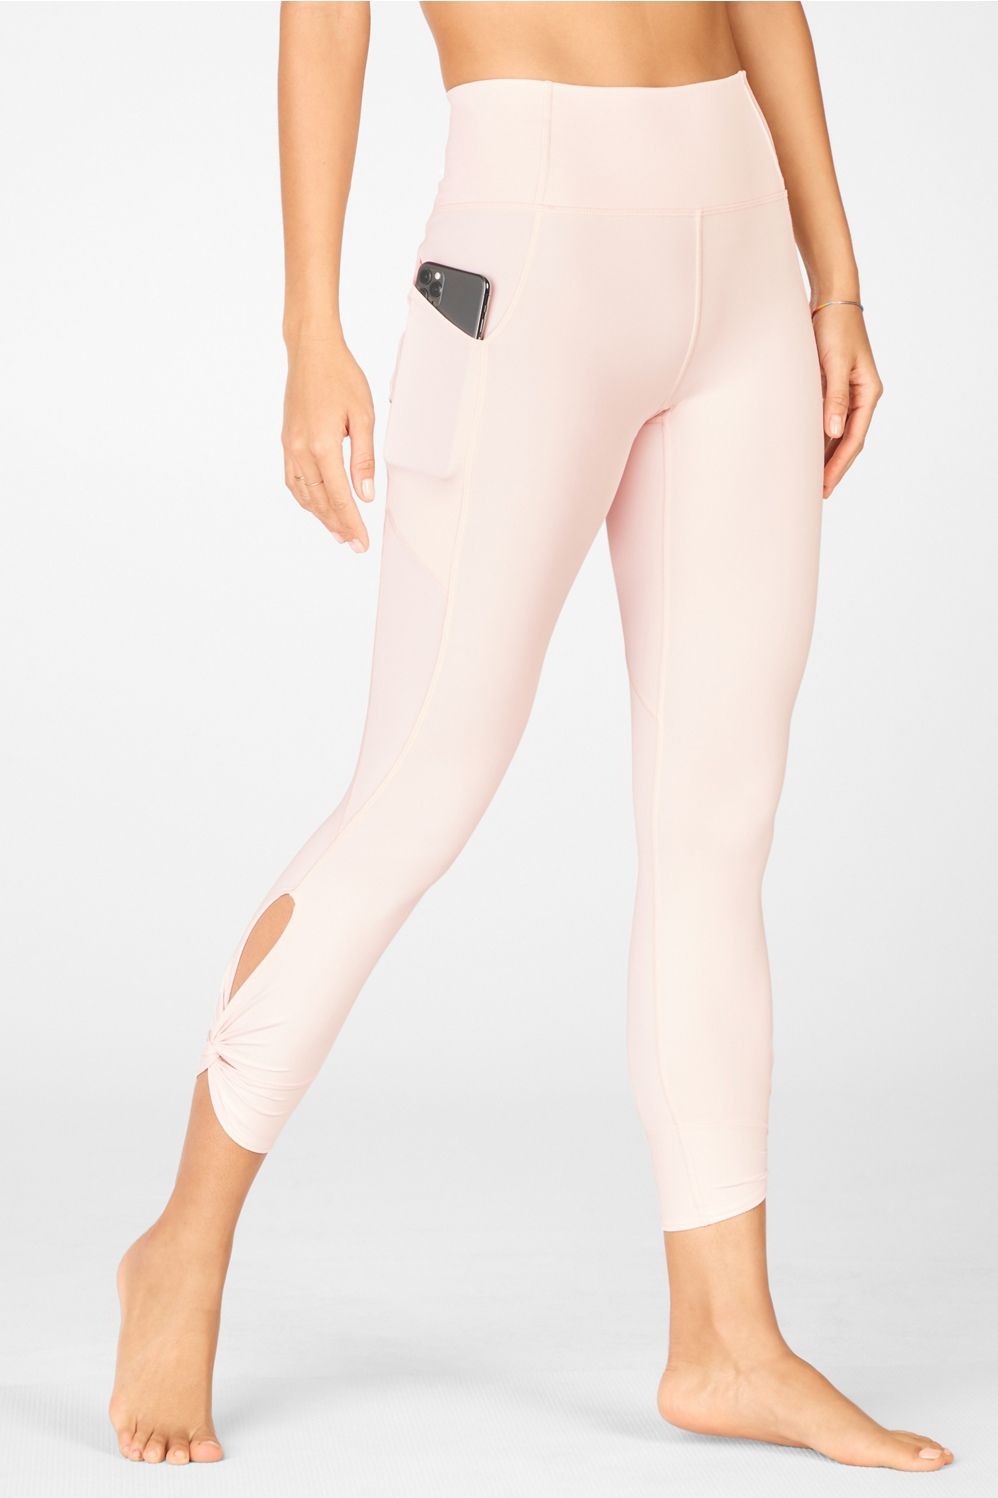 Oasis High-Waisted Twist 7/8 | Fabletics